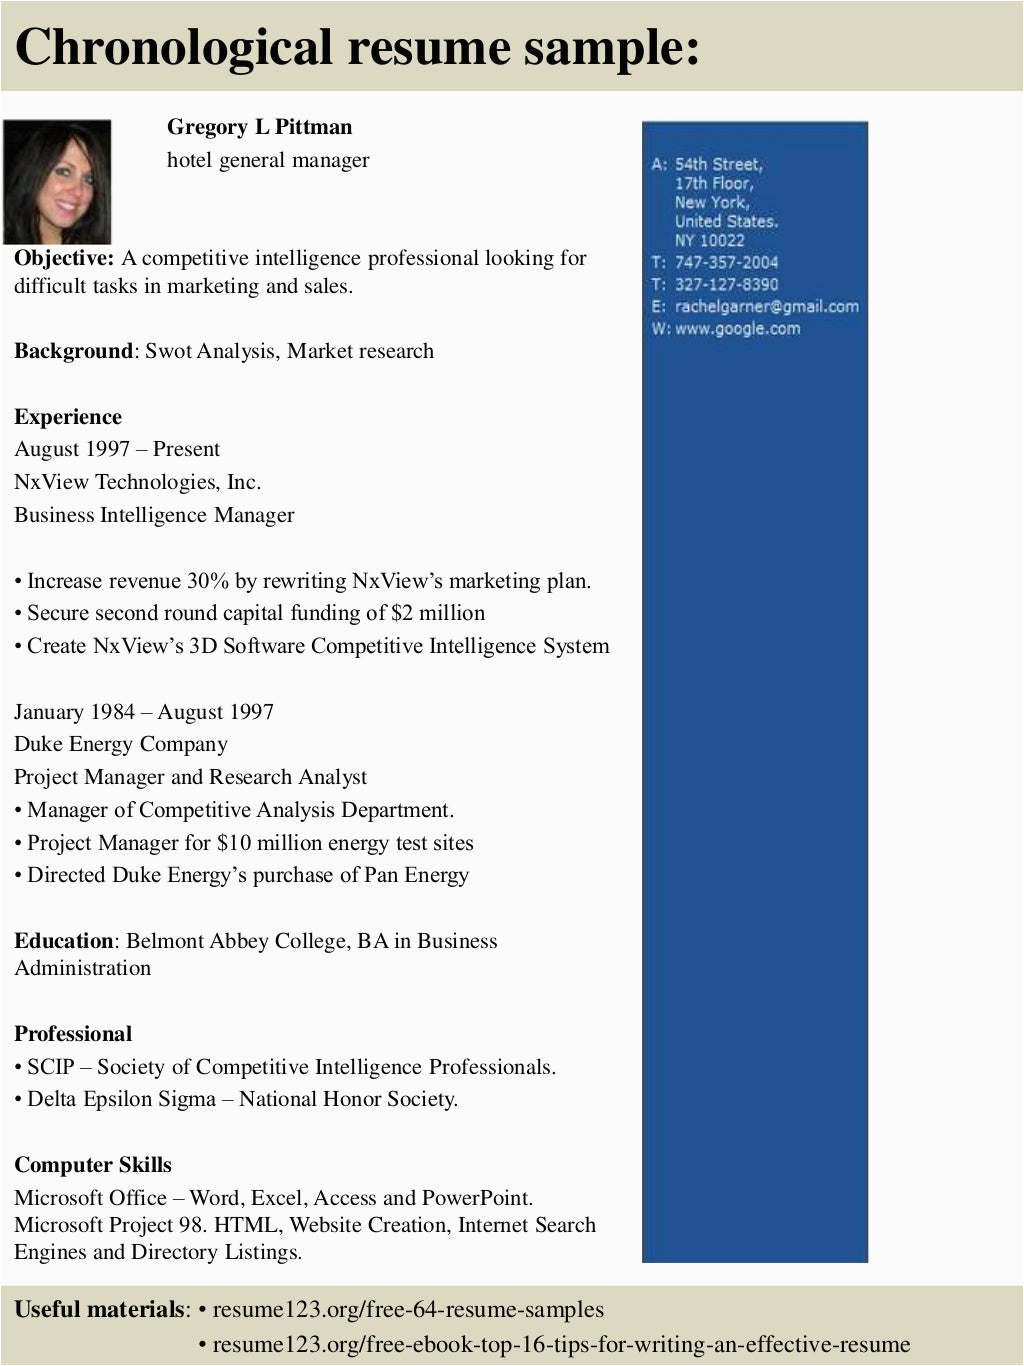 Sample Resume for General Manager Hotel top 8 Hotel General Manager Resume Samples